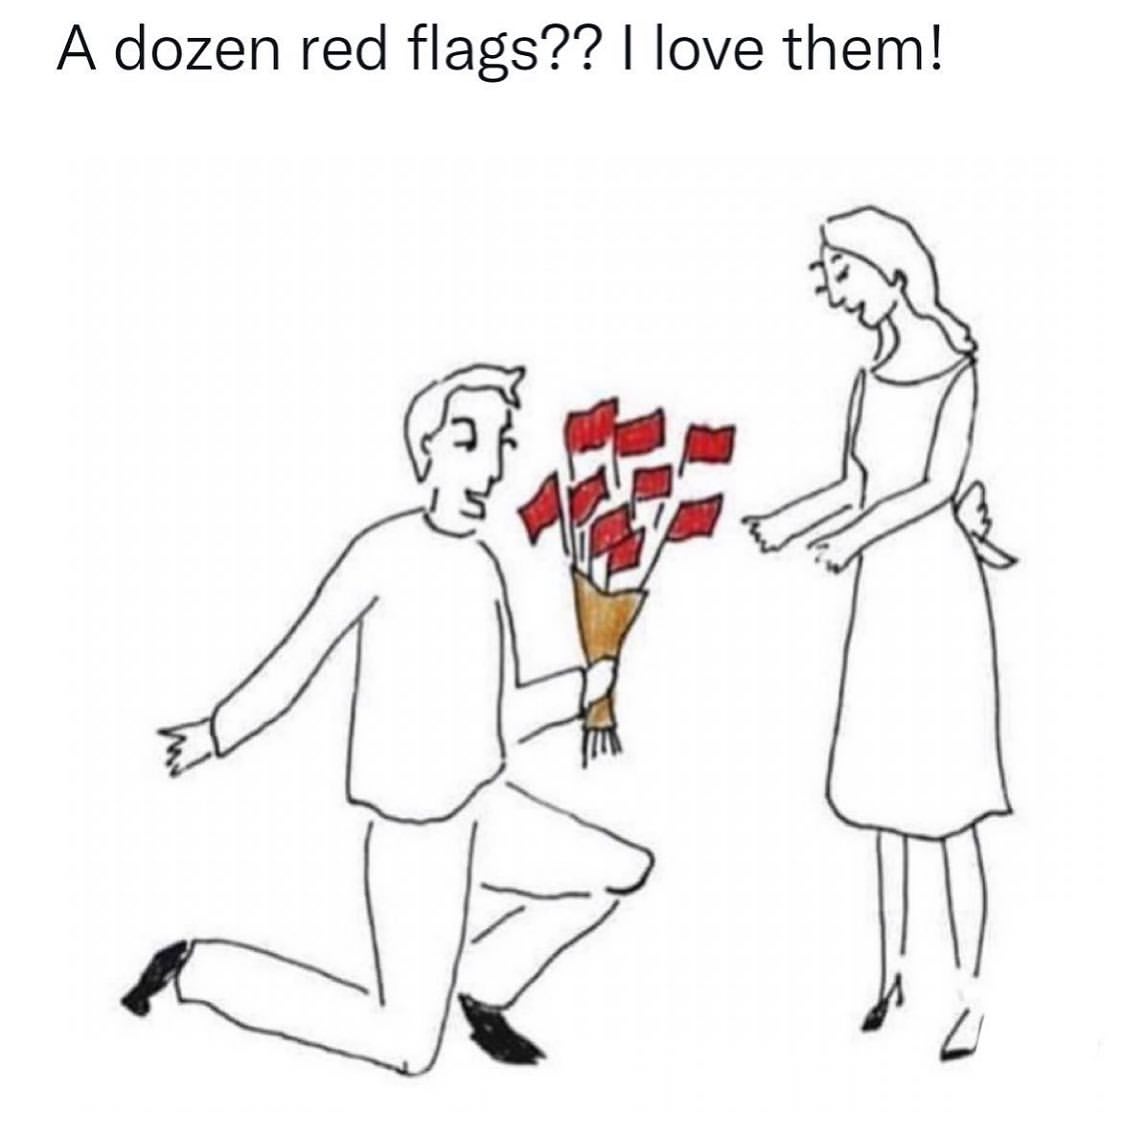 A dozen red flags?? I love them!